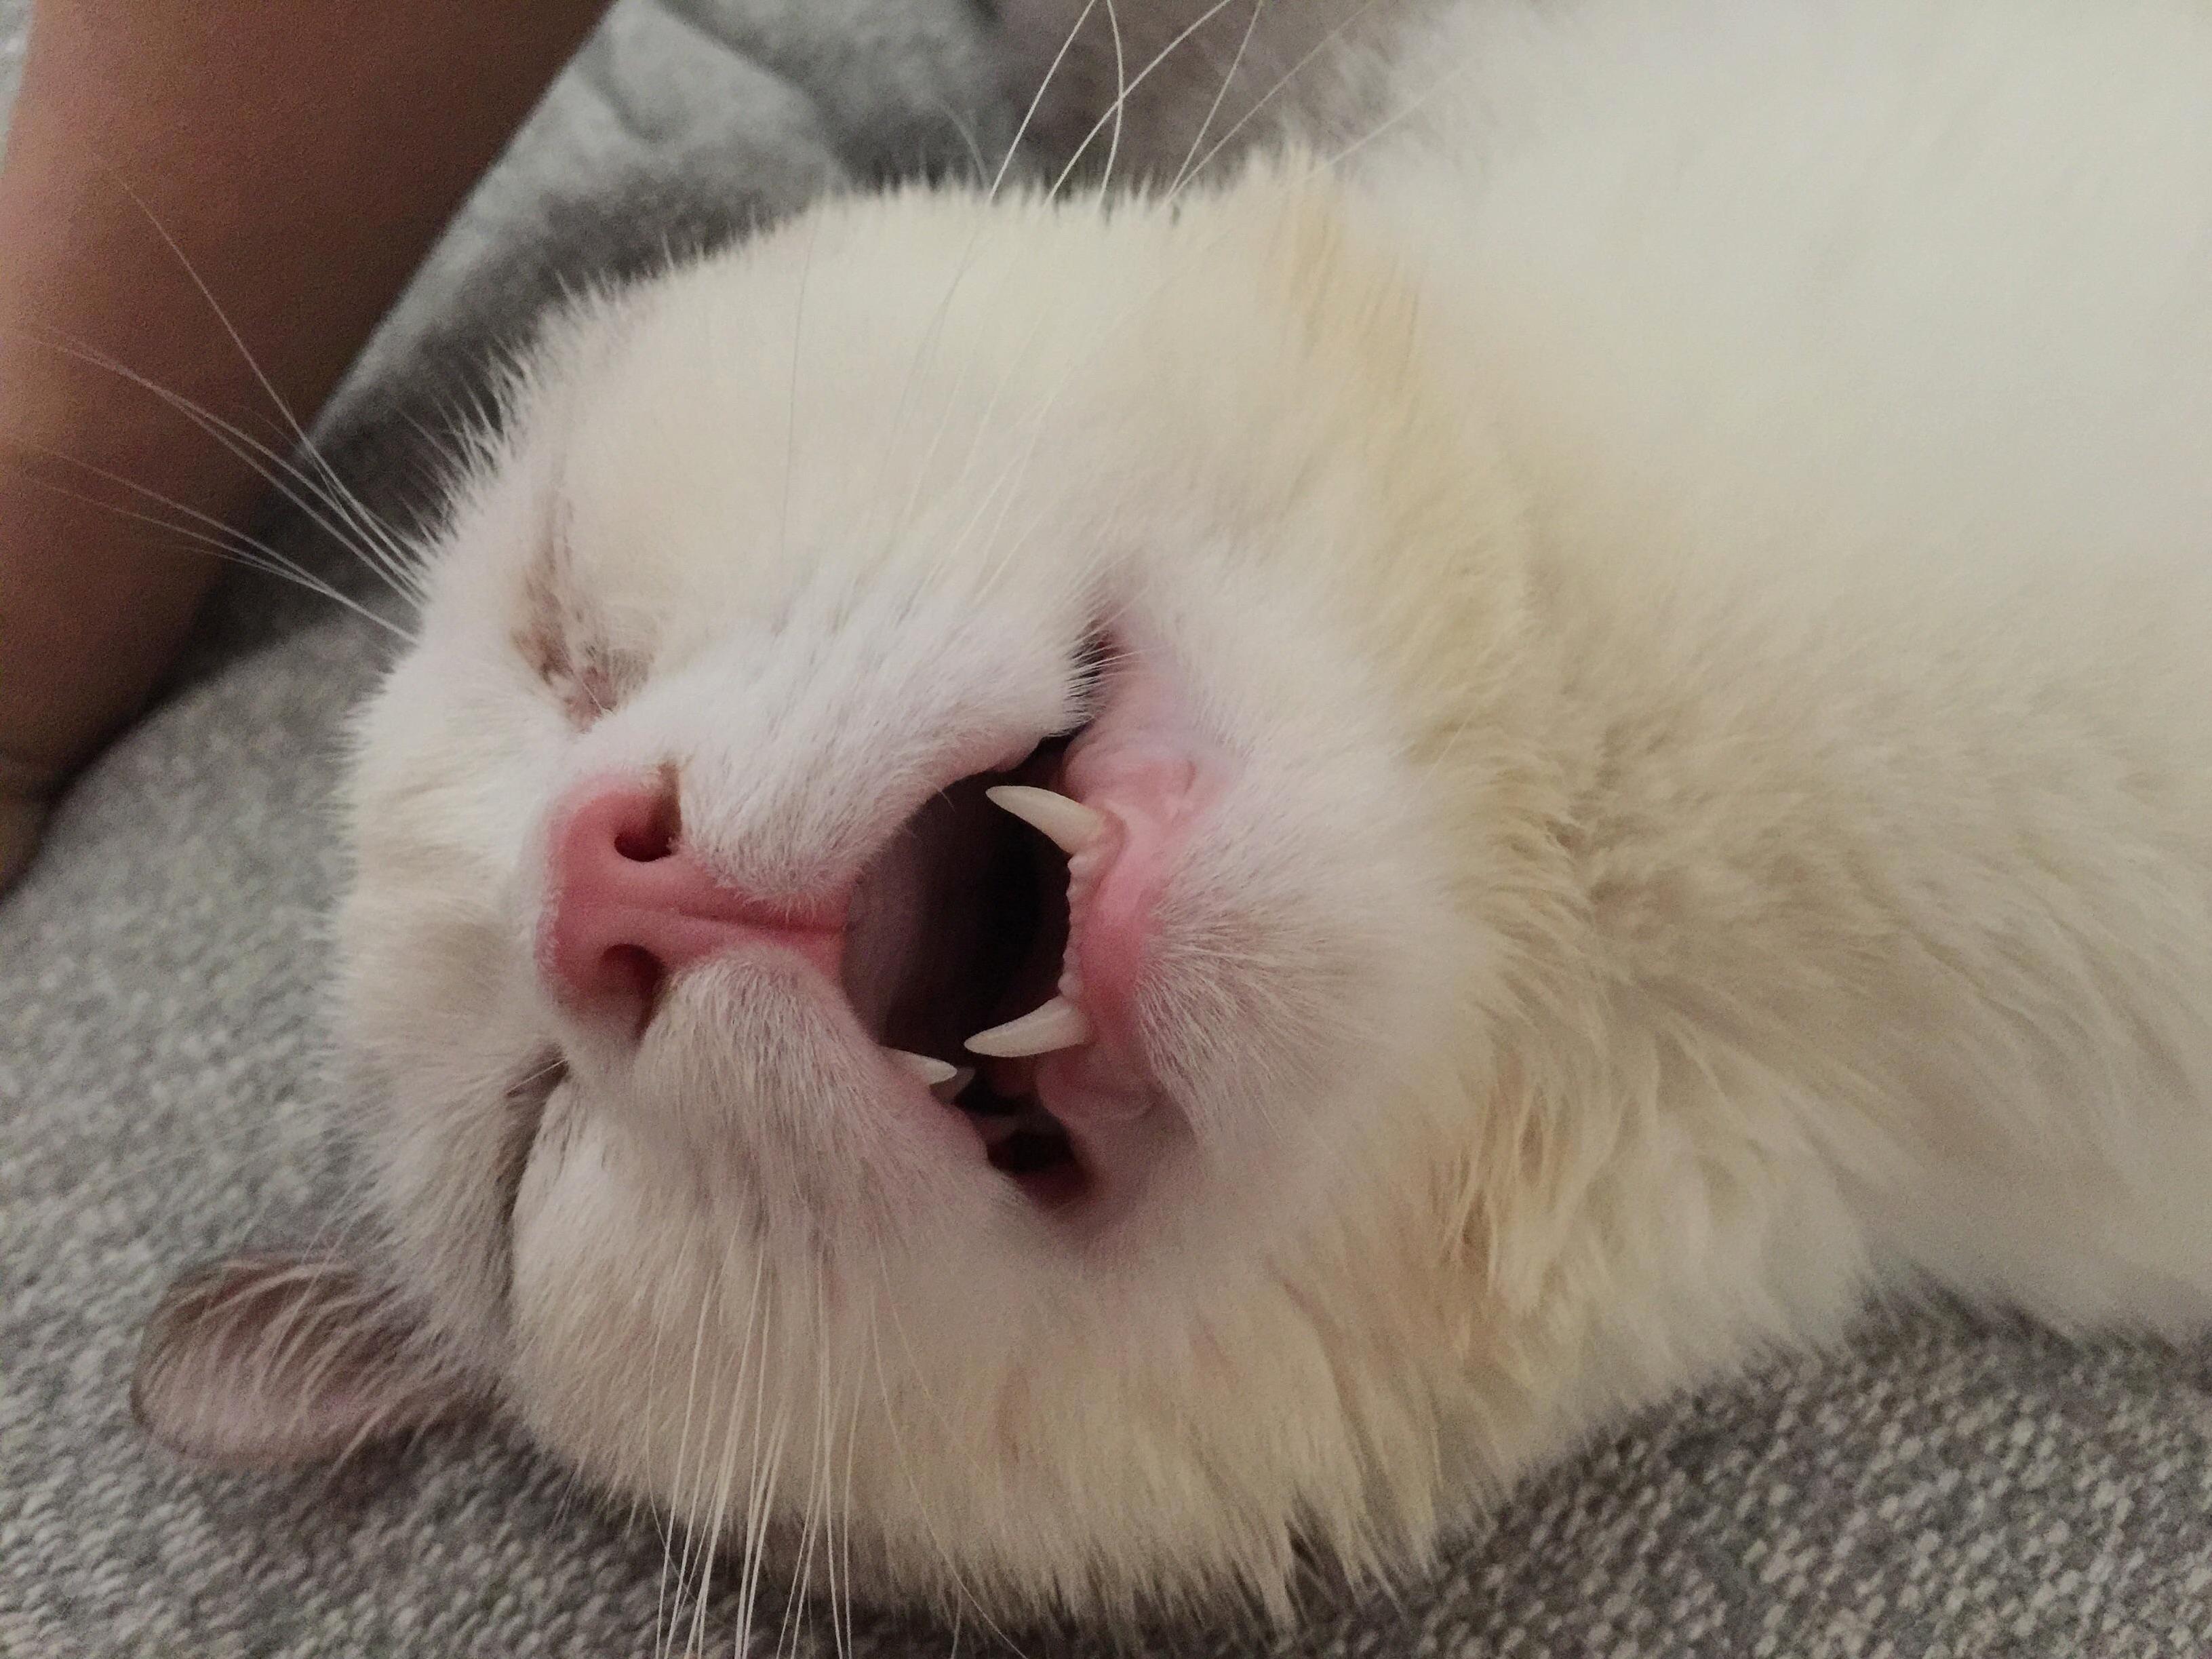 My cat napping with his mouth open